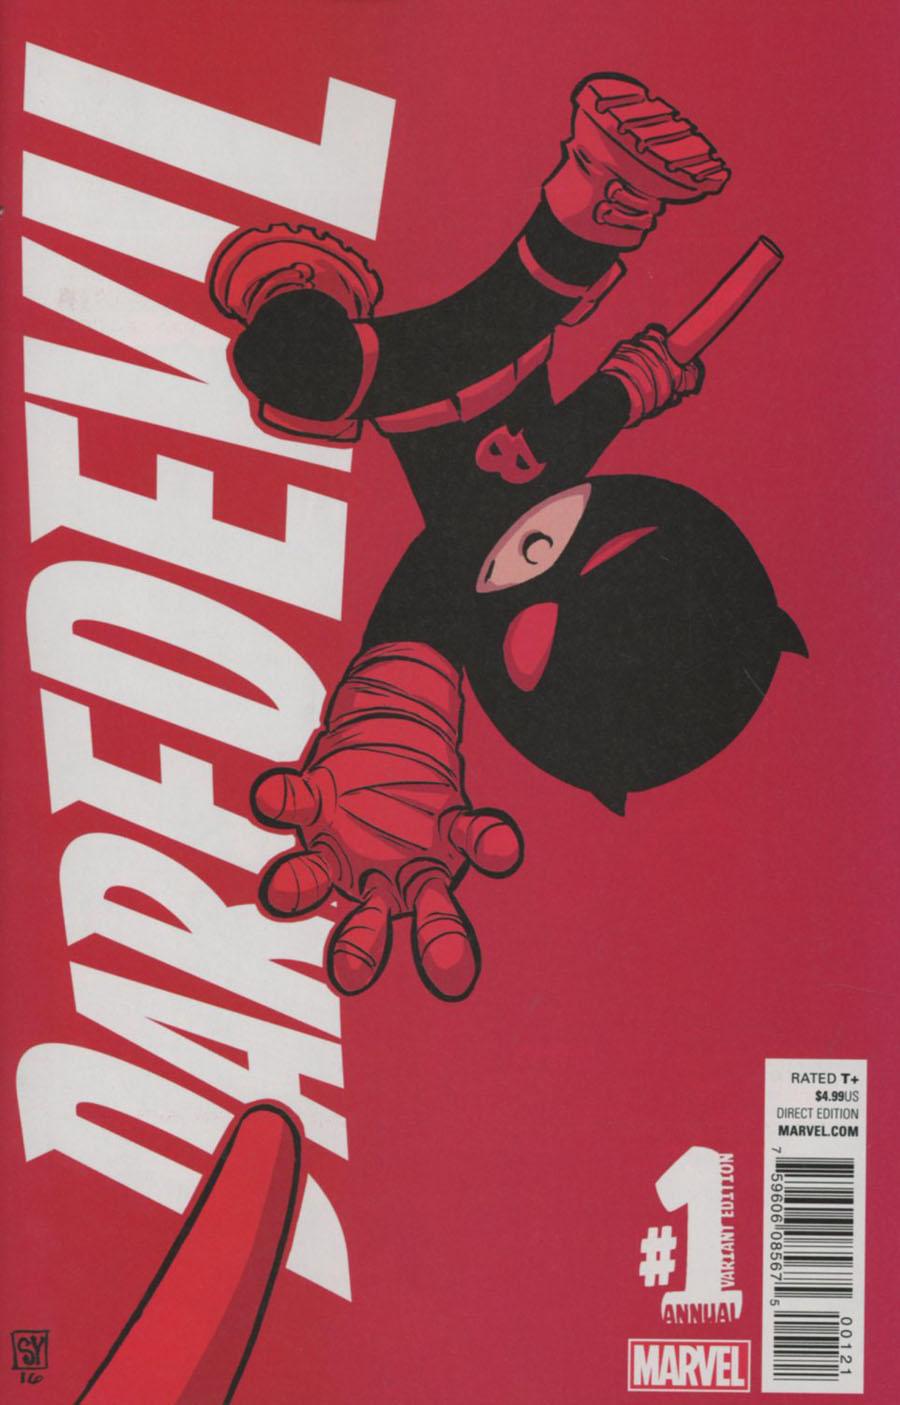 Daredevil Vol 5 Annual #1 2016 Cover B Variant Skottie Young Baby Cover